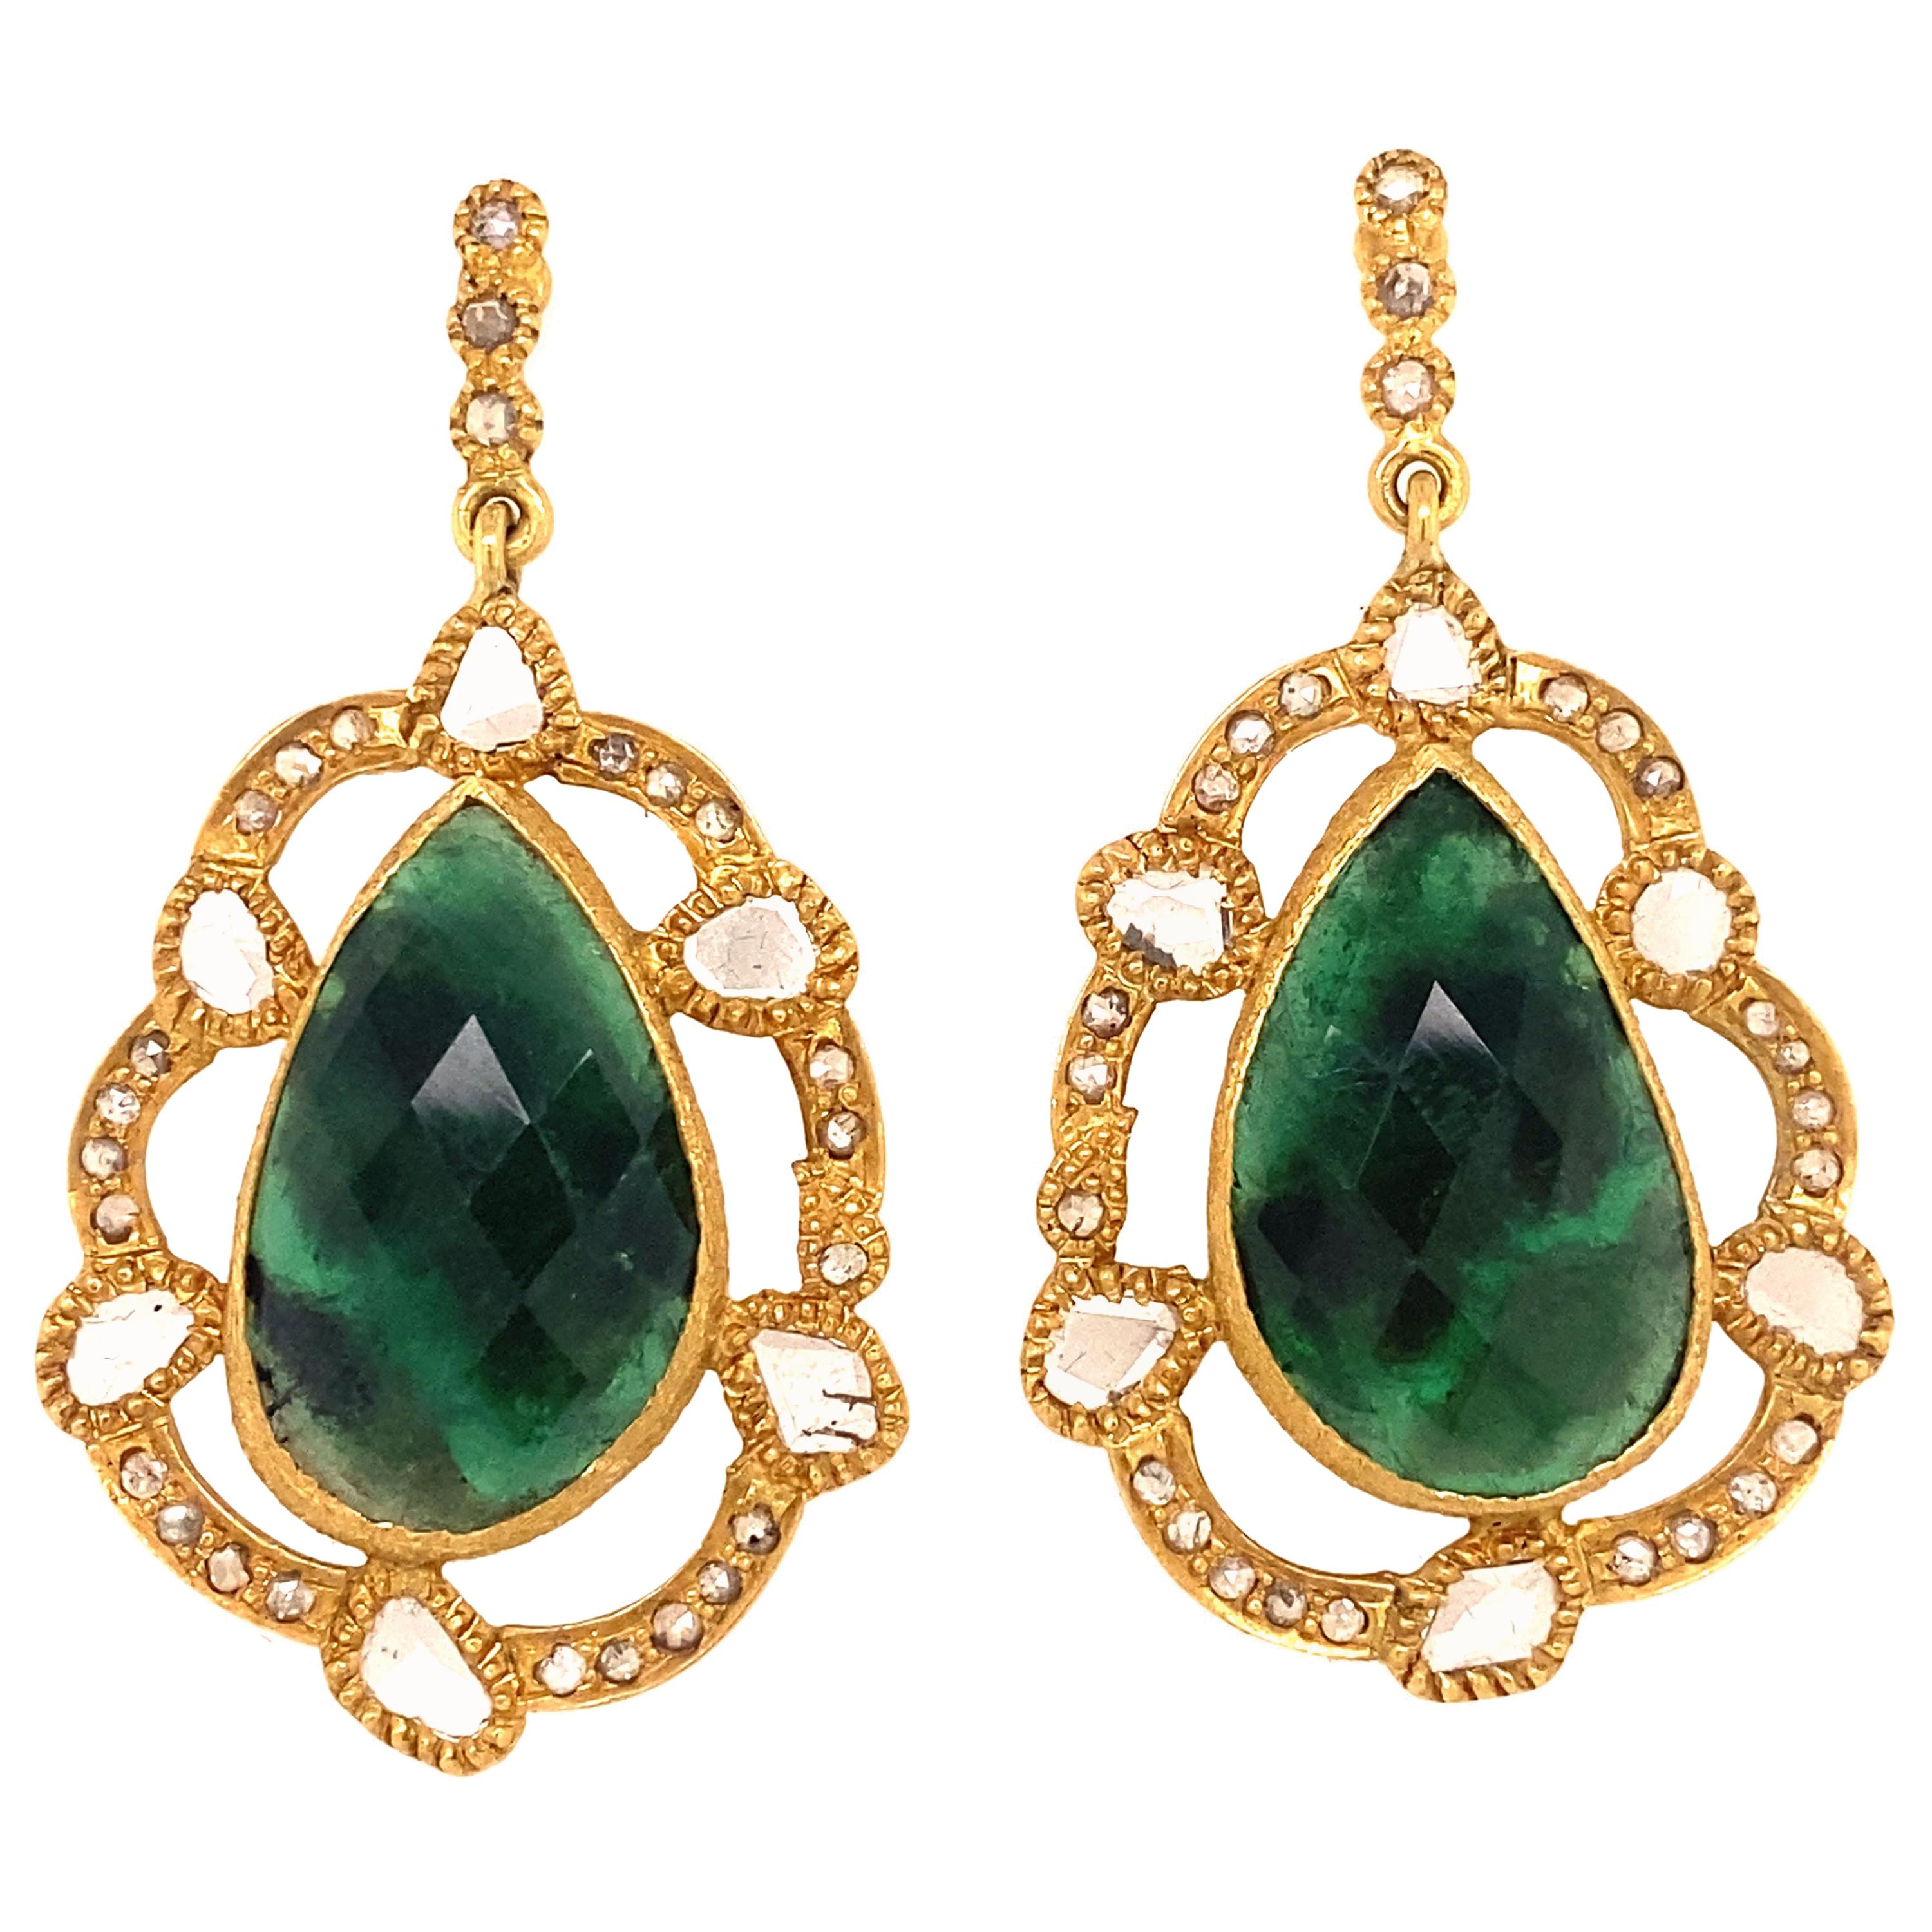 Marbled Emerald Slice Earrings with 1.48 Carat Diamonds